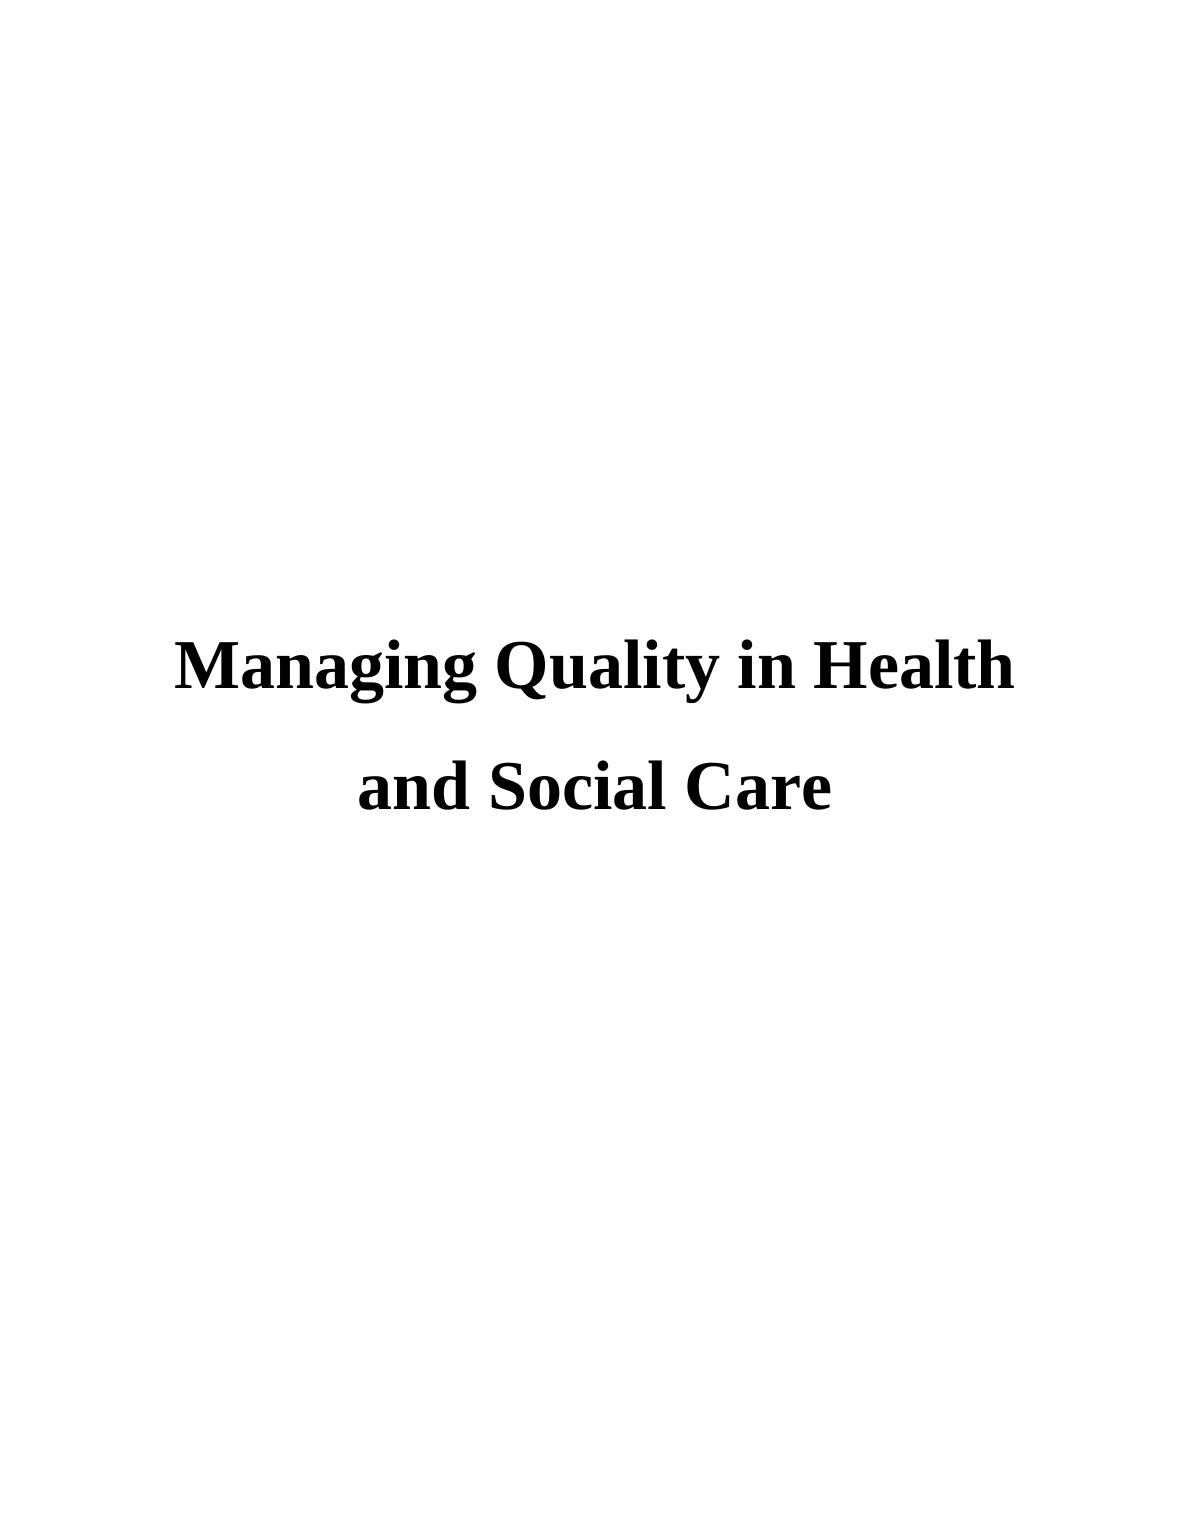 Stakeholders and Impact of Service Quality - Report_1